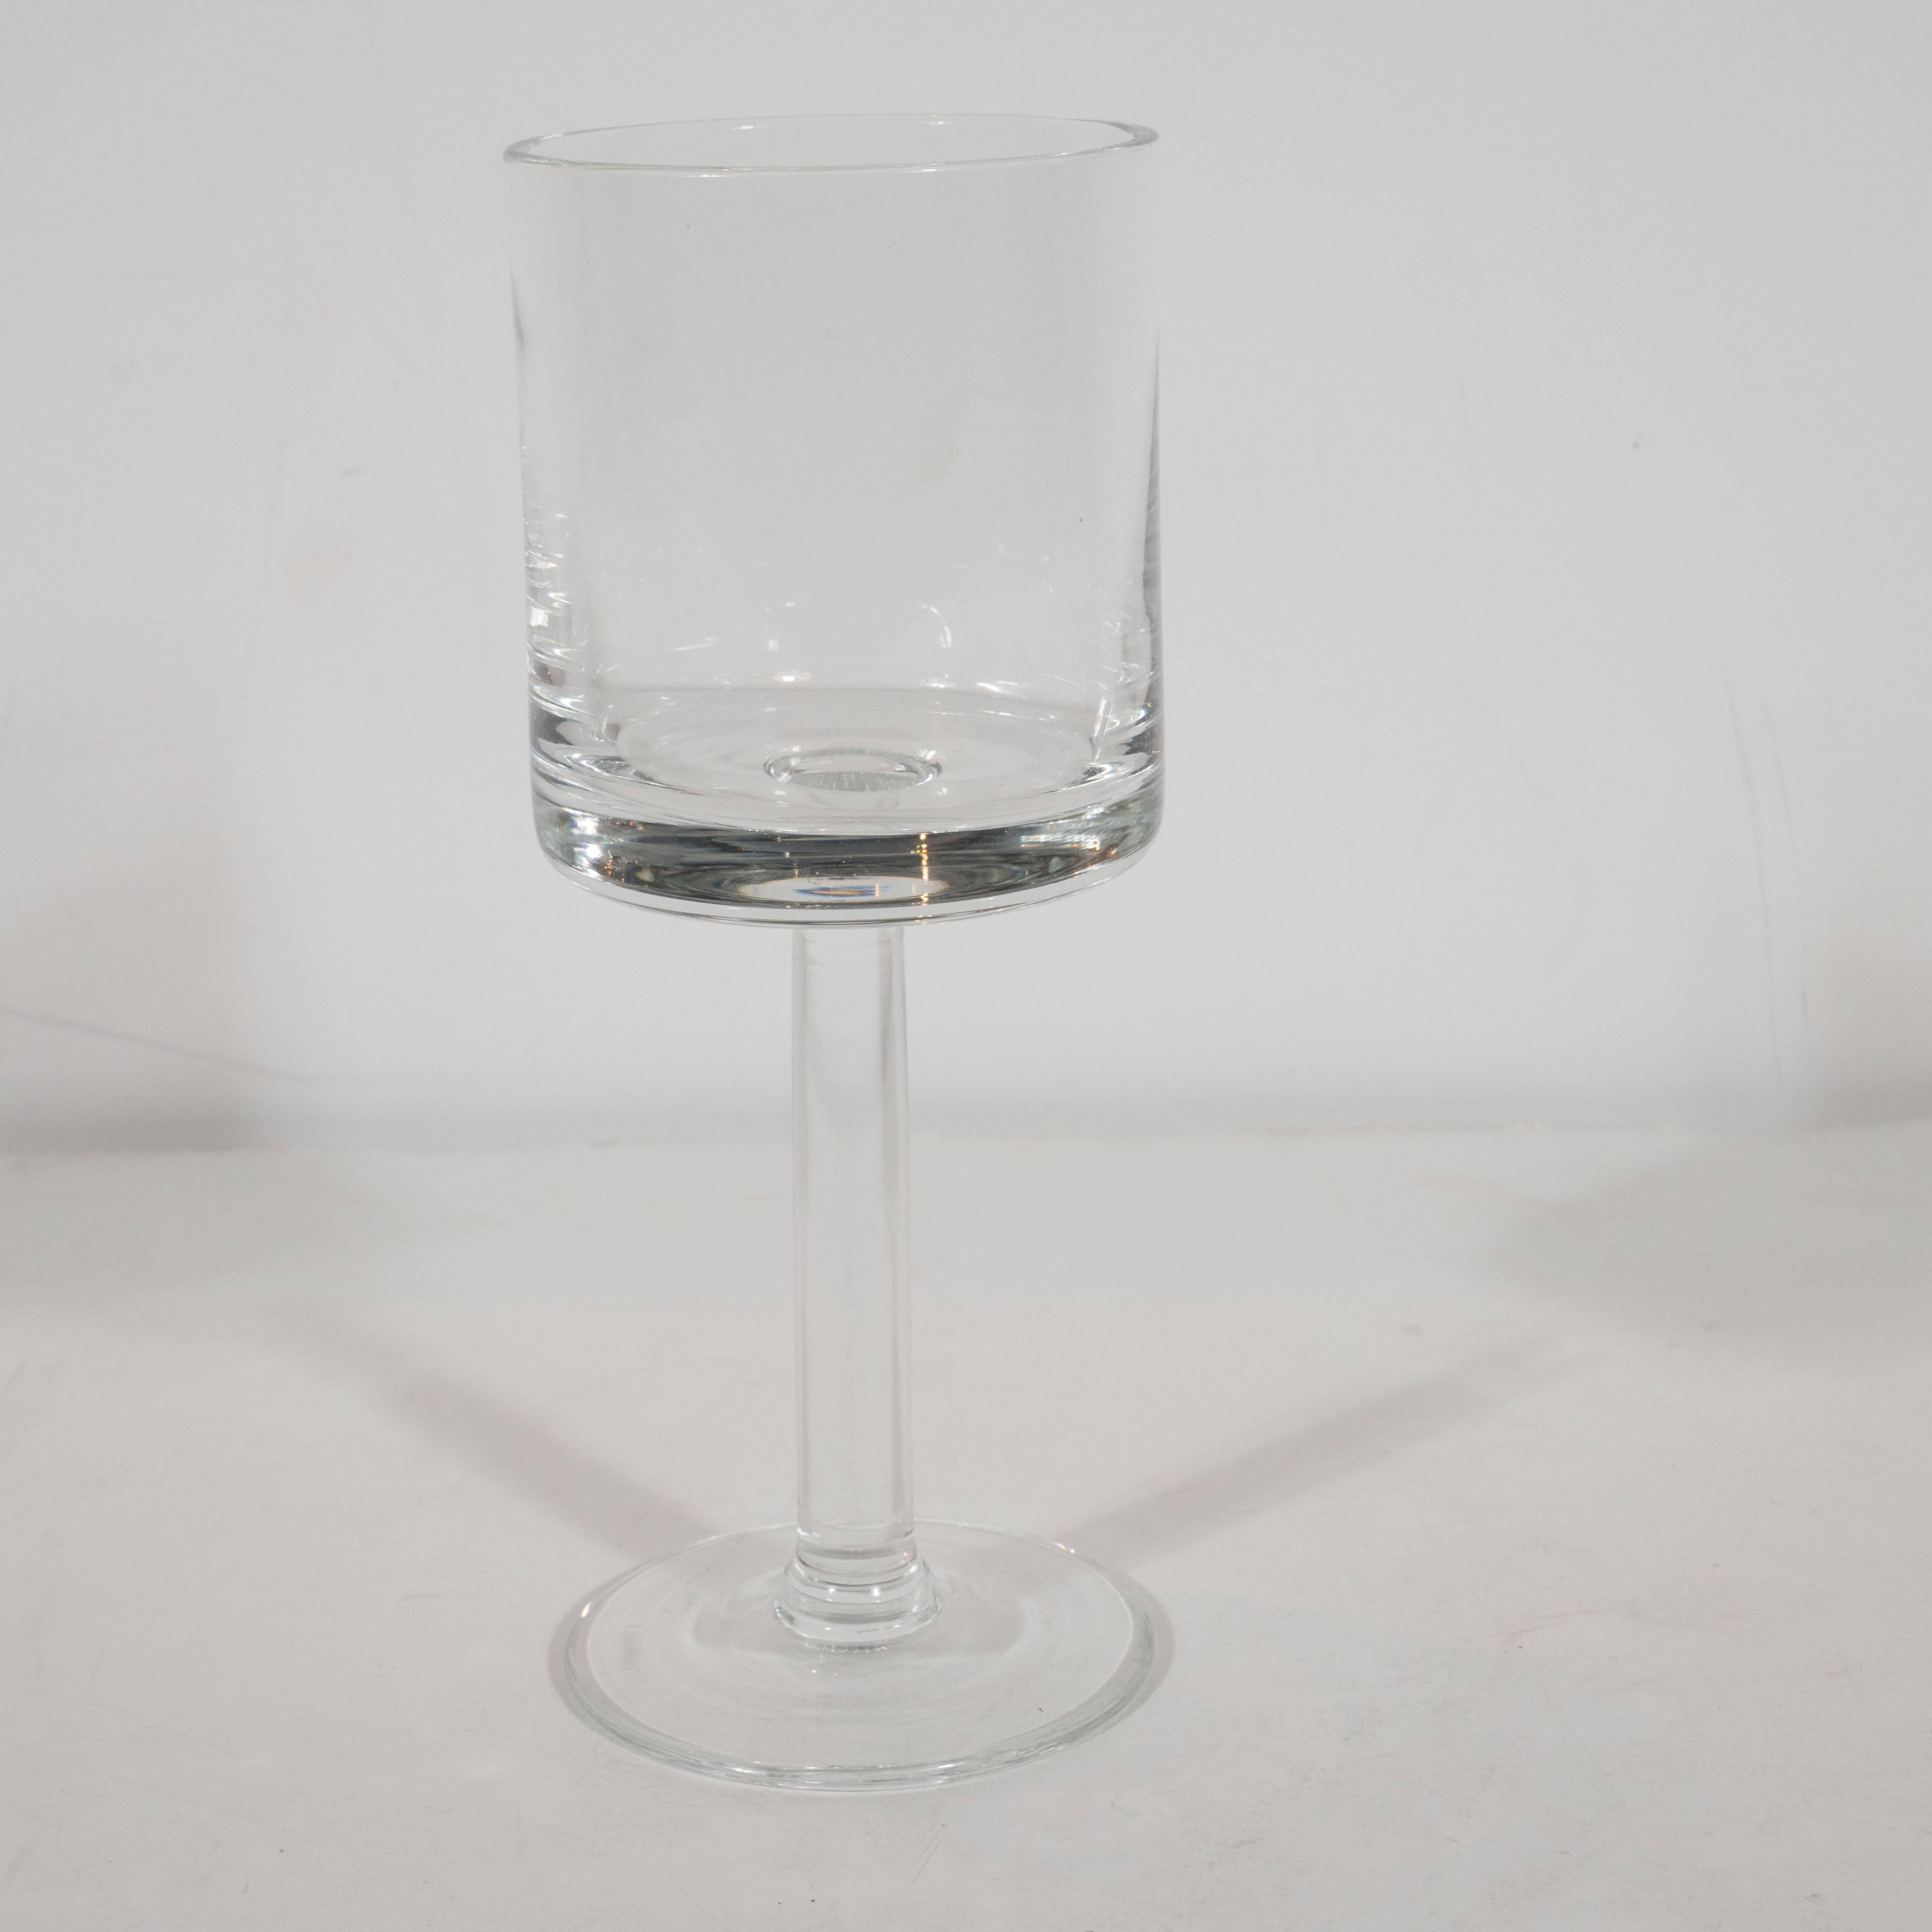 This refined set of eight glasses was realized by the illustrious American designer Calvin Klein, circa 1980. They embody Klein's signature aesthetic of seductive minimalism translated to glassware. Each glass has a circular base, a cylindrical